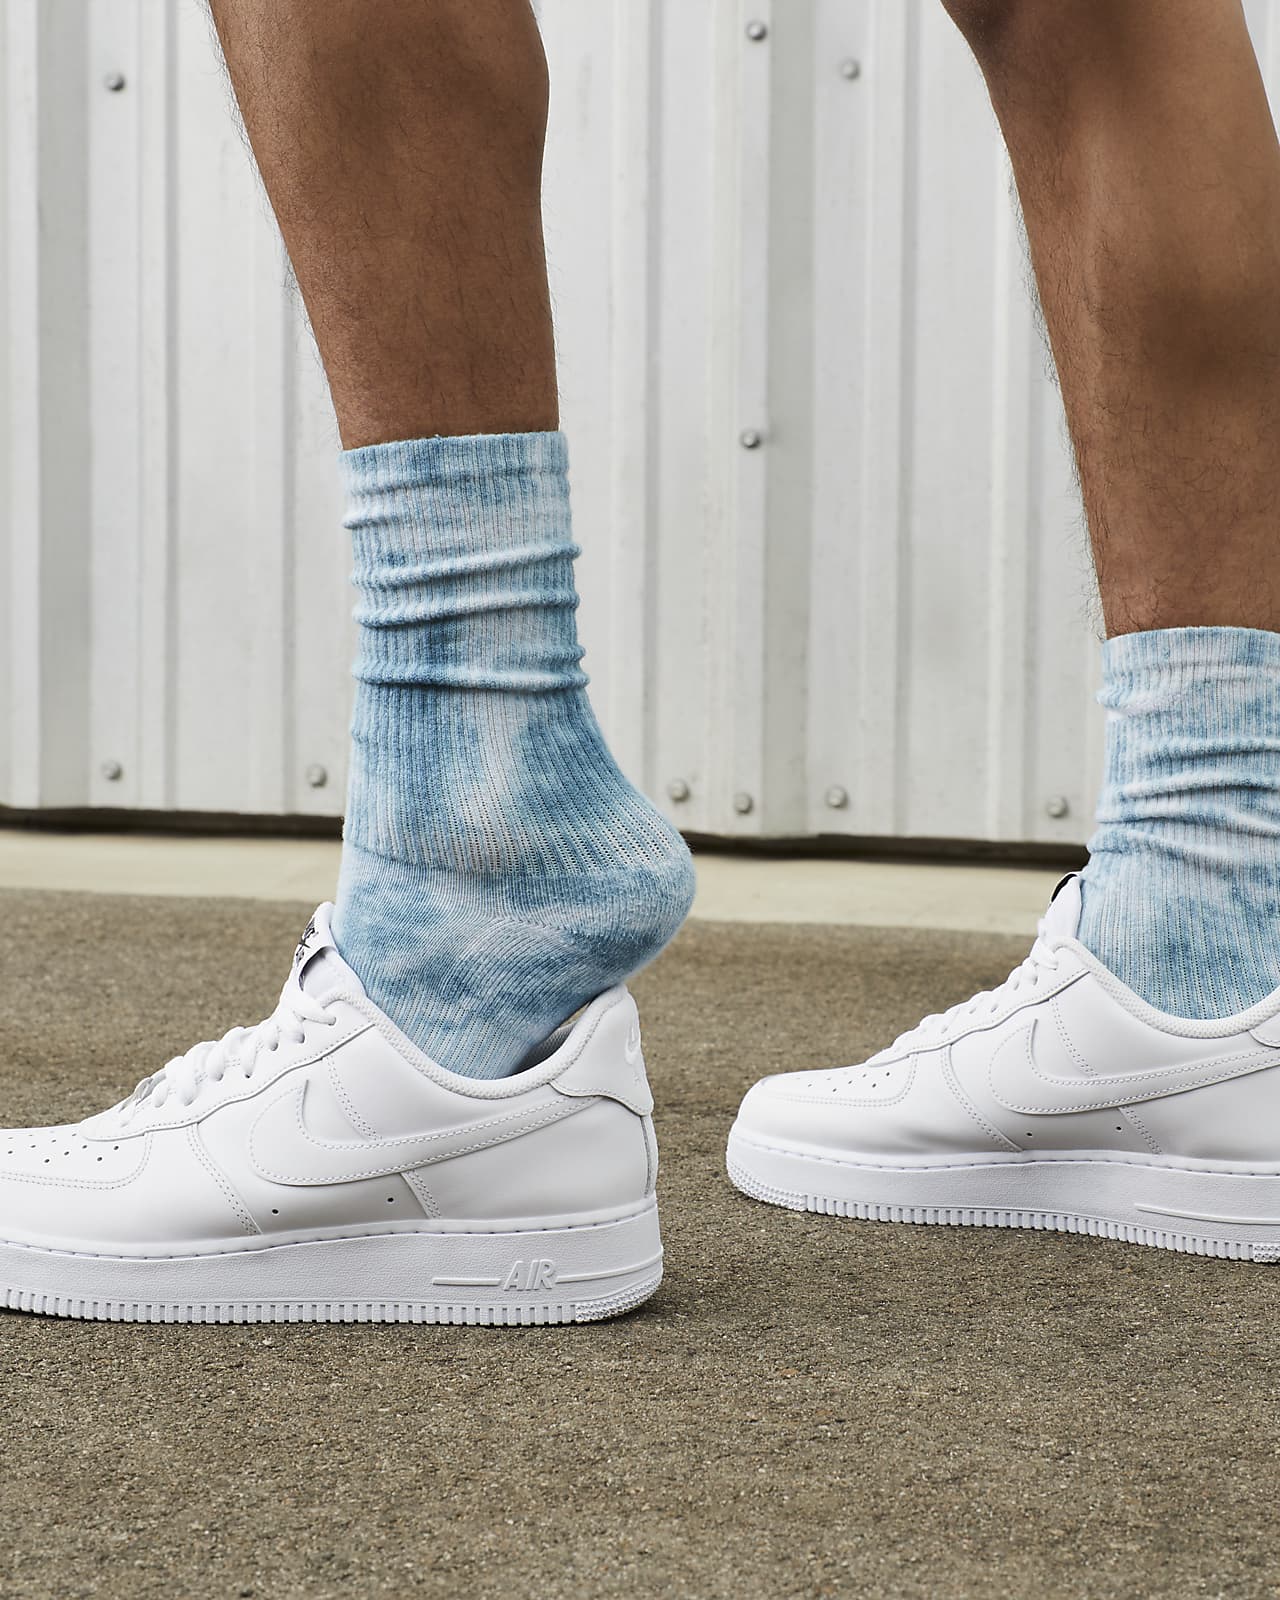 Nike Air Force 1 Special Field On Feet